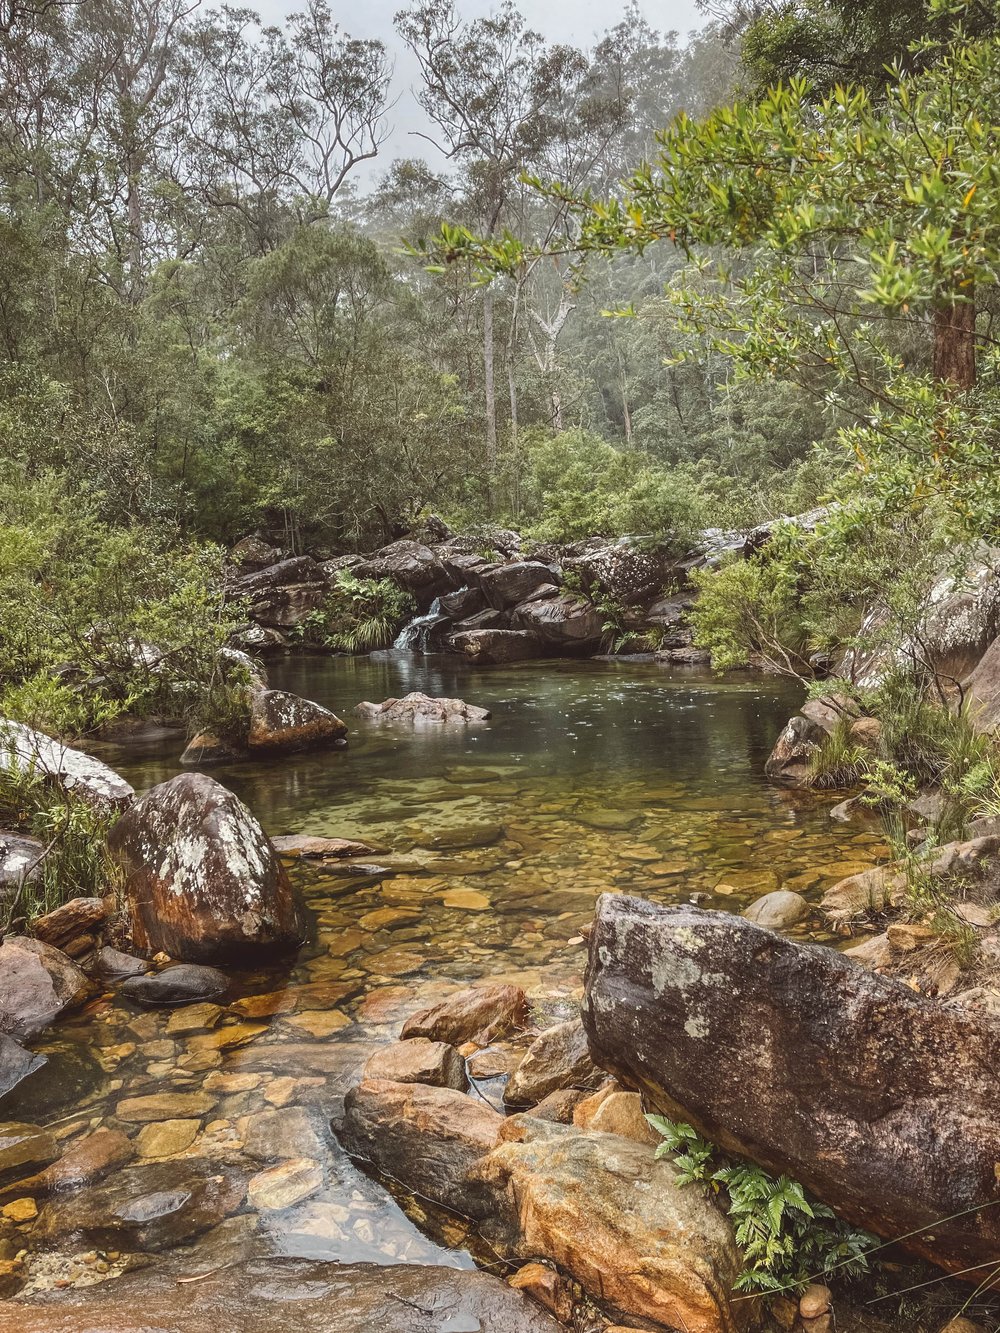 Relaxing pool of water - Sherwood Nature Reserve - New South Wales (NSW) - Australia